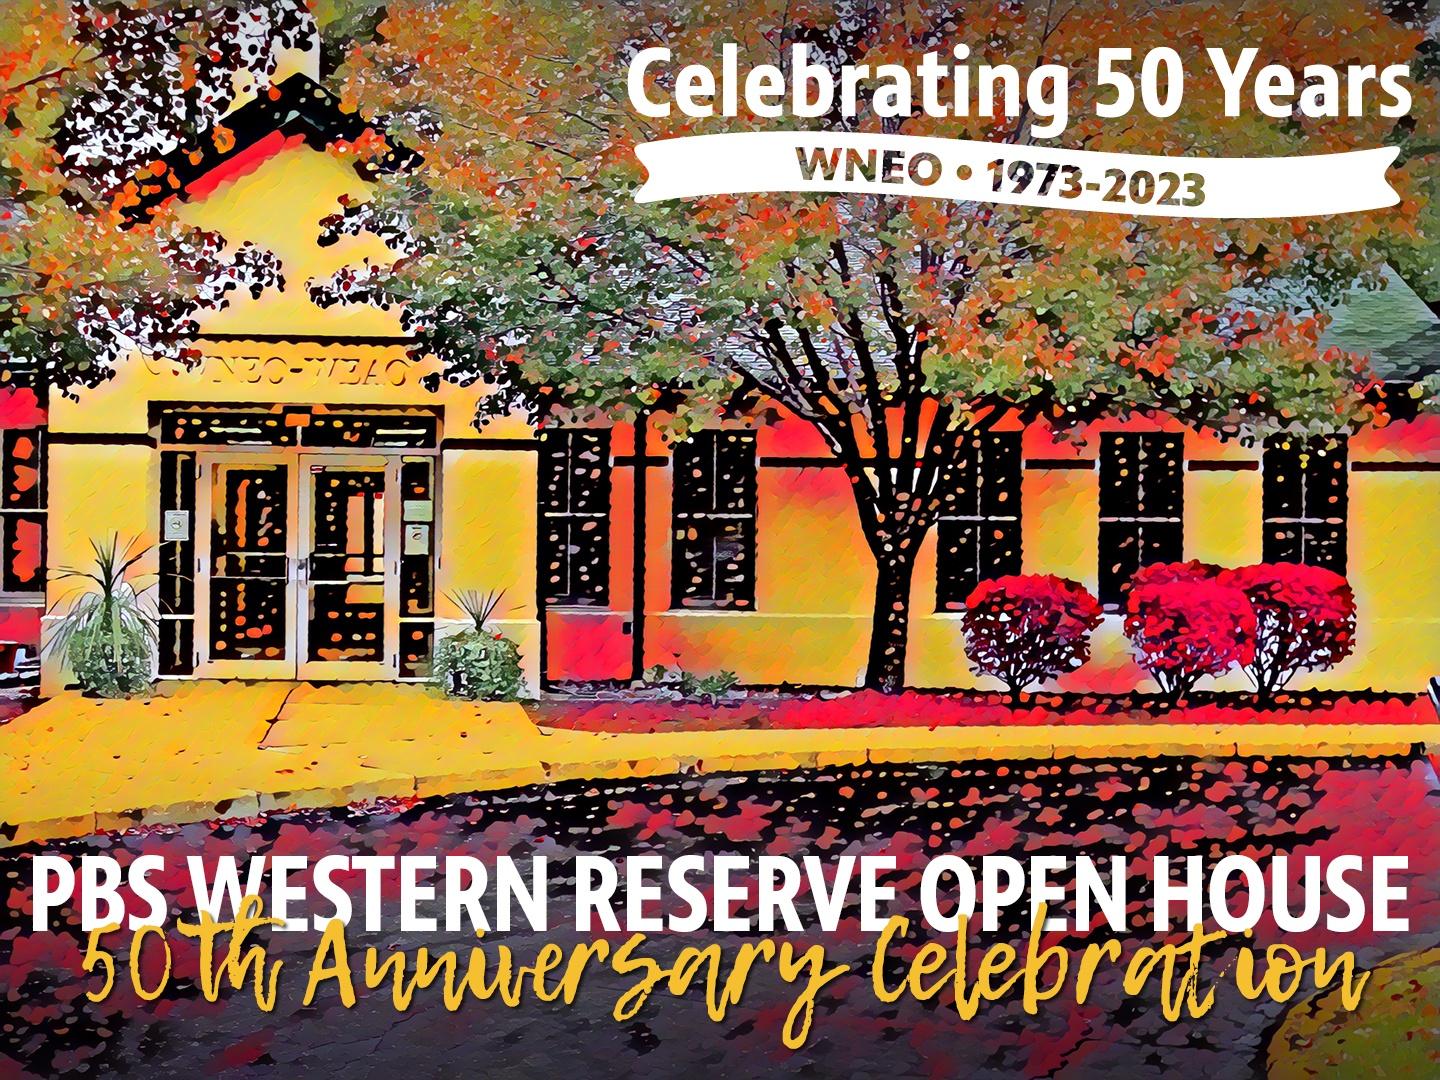 PBS Western Reserve Open House: 50th Anniversary Celebration